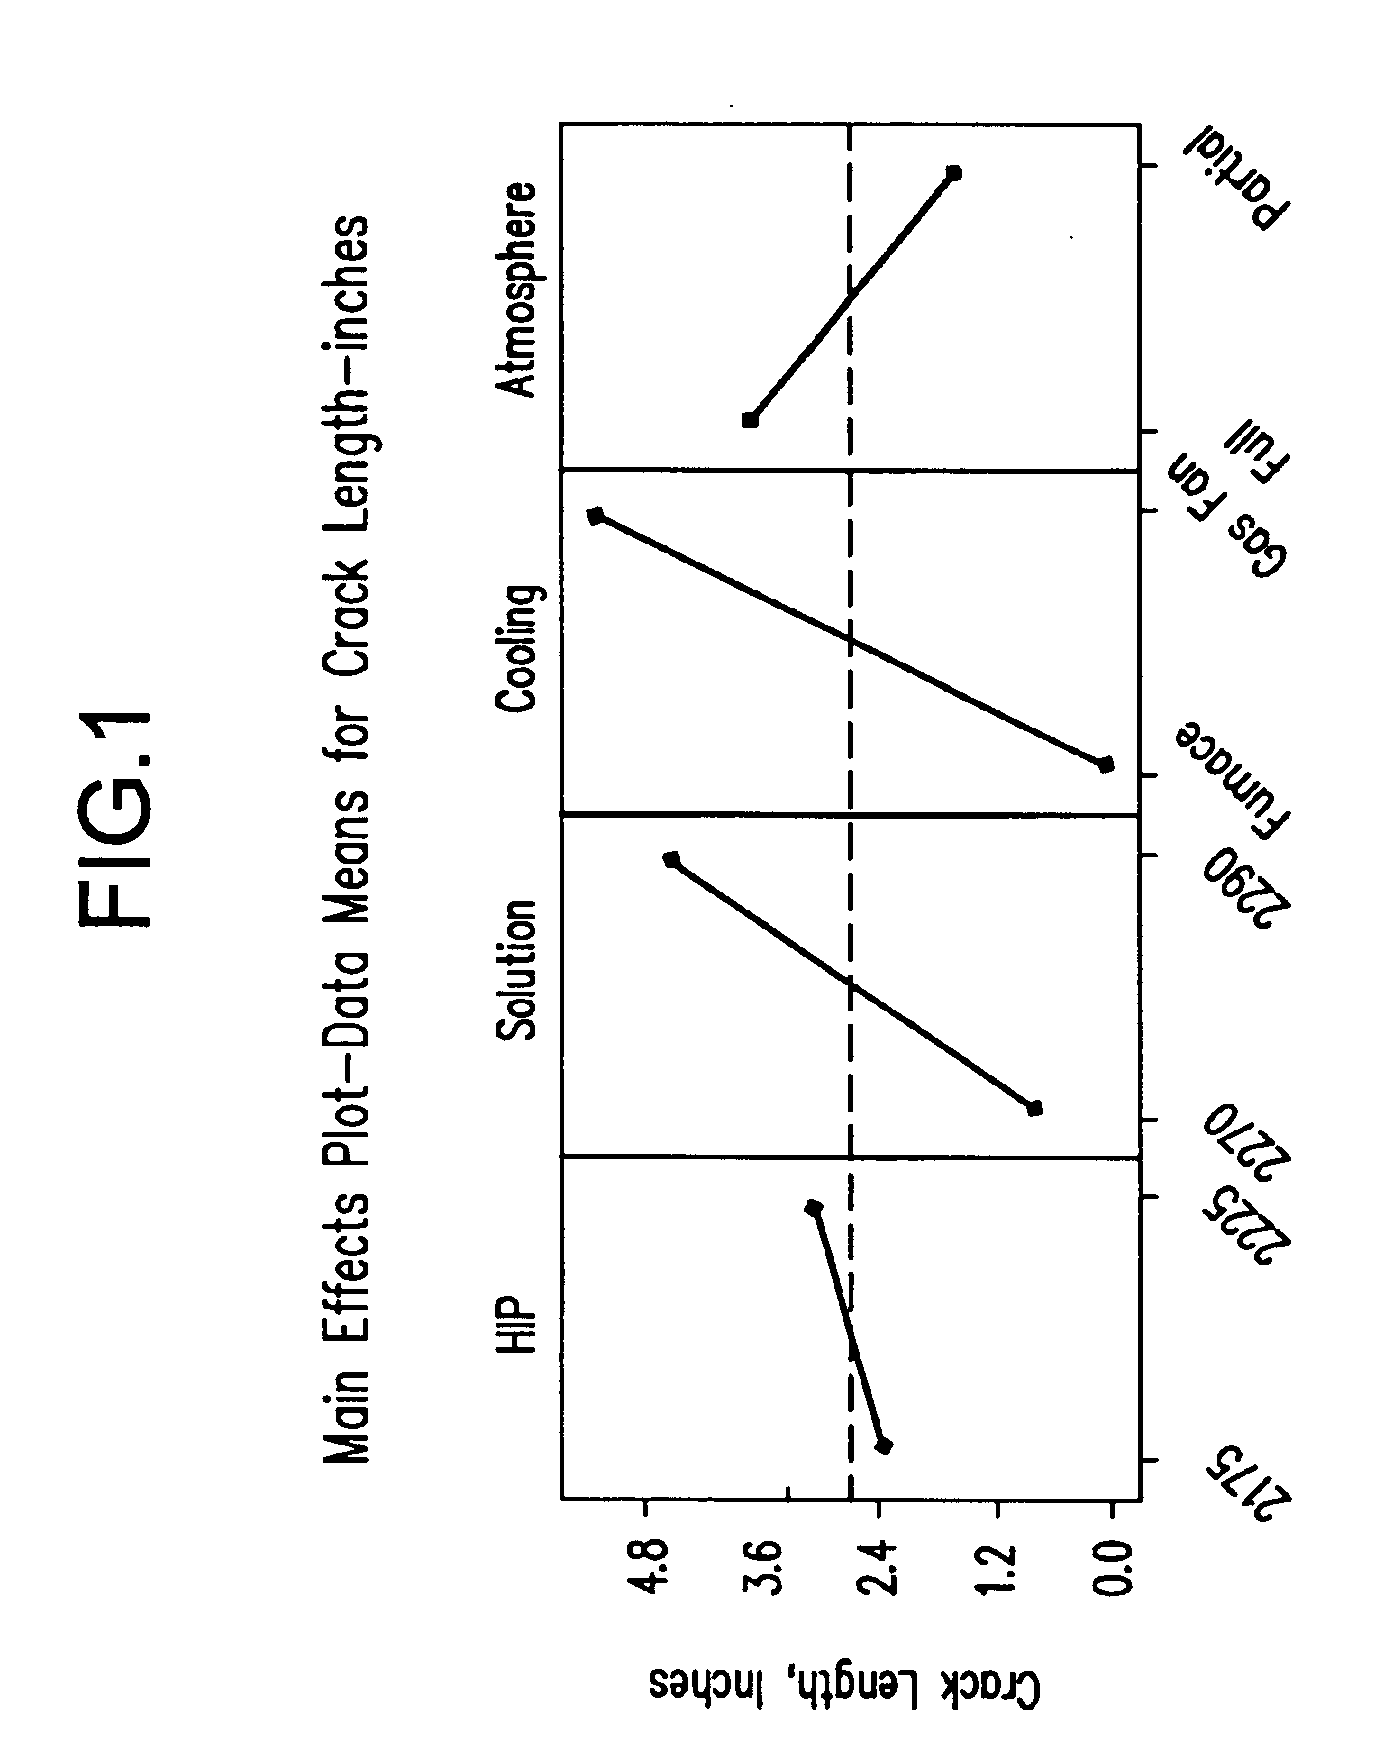 Nickel base superalloys and turbine components fabricated therefrom